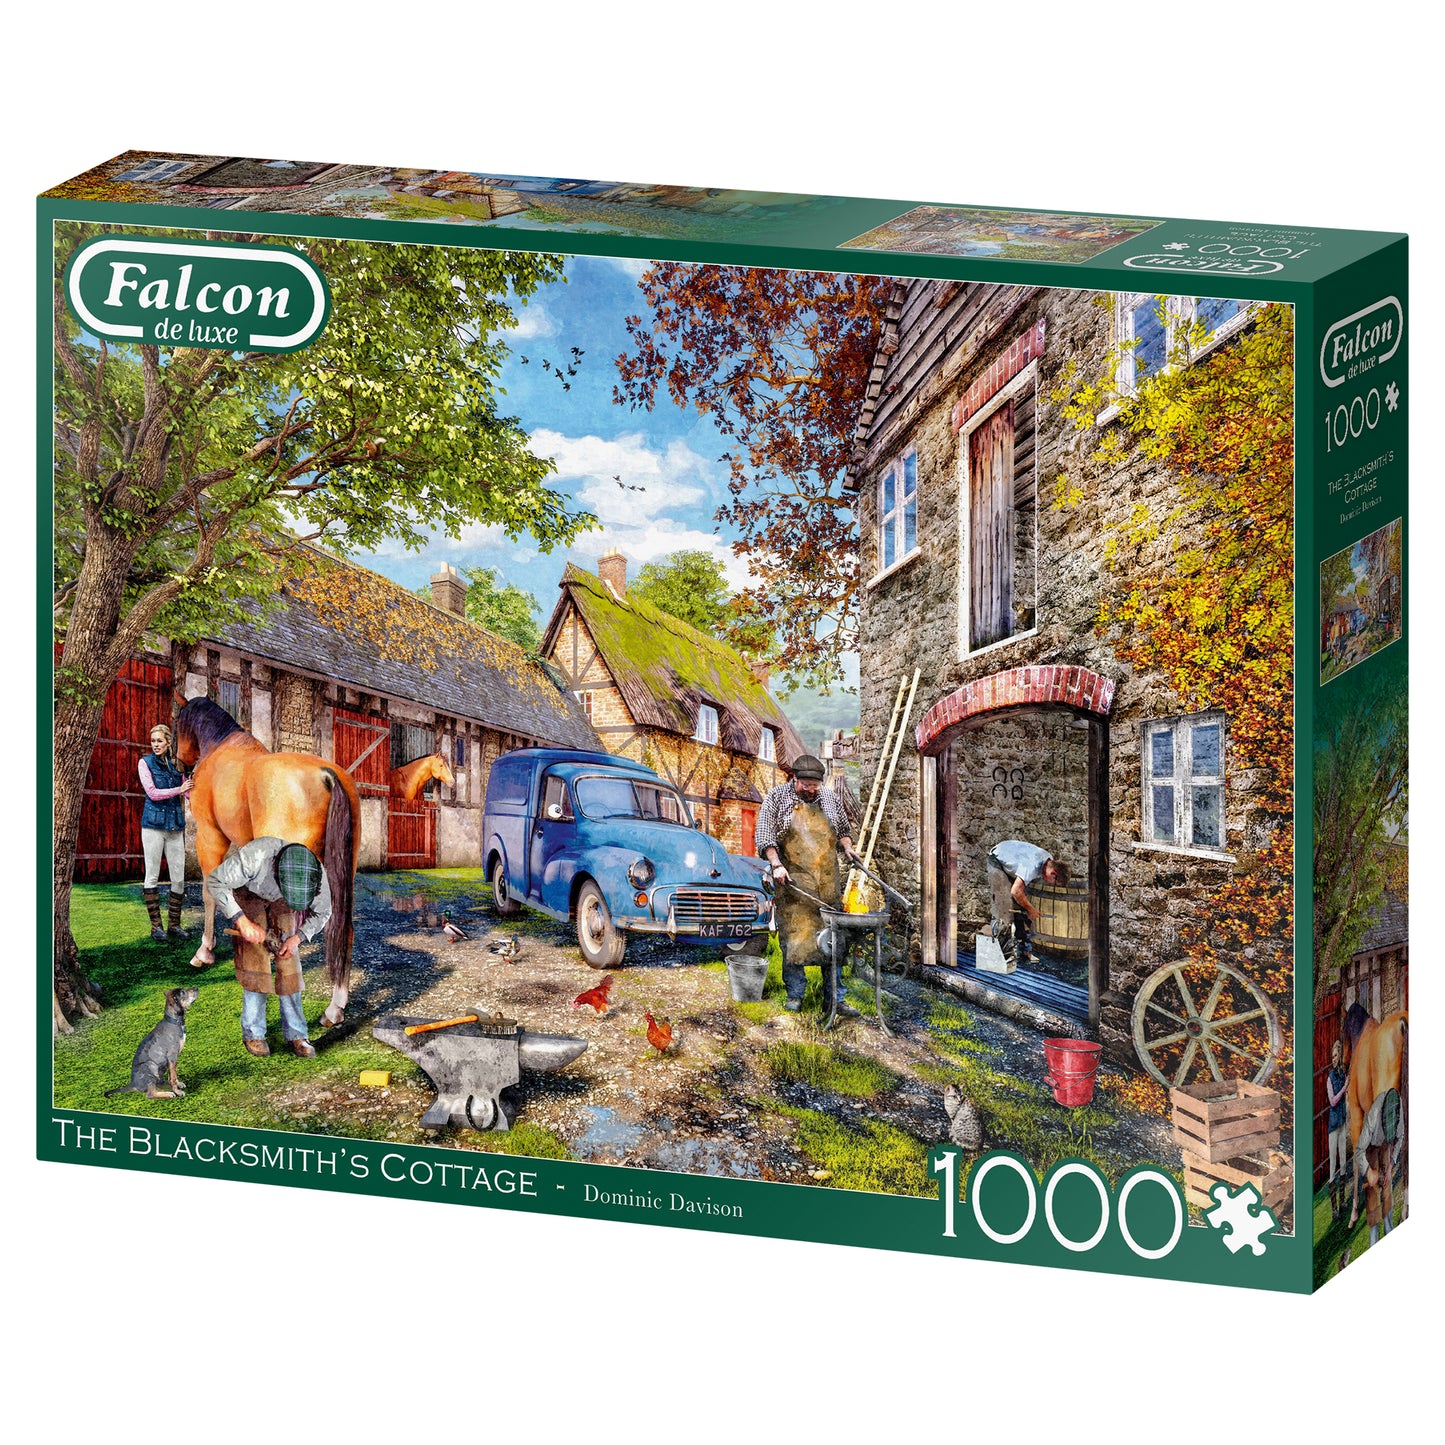 Falcon - The Blacksmith's Cottage (1000 pieces) - product image - Jumboplay.com